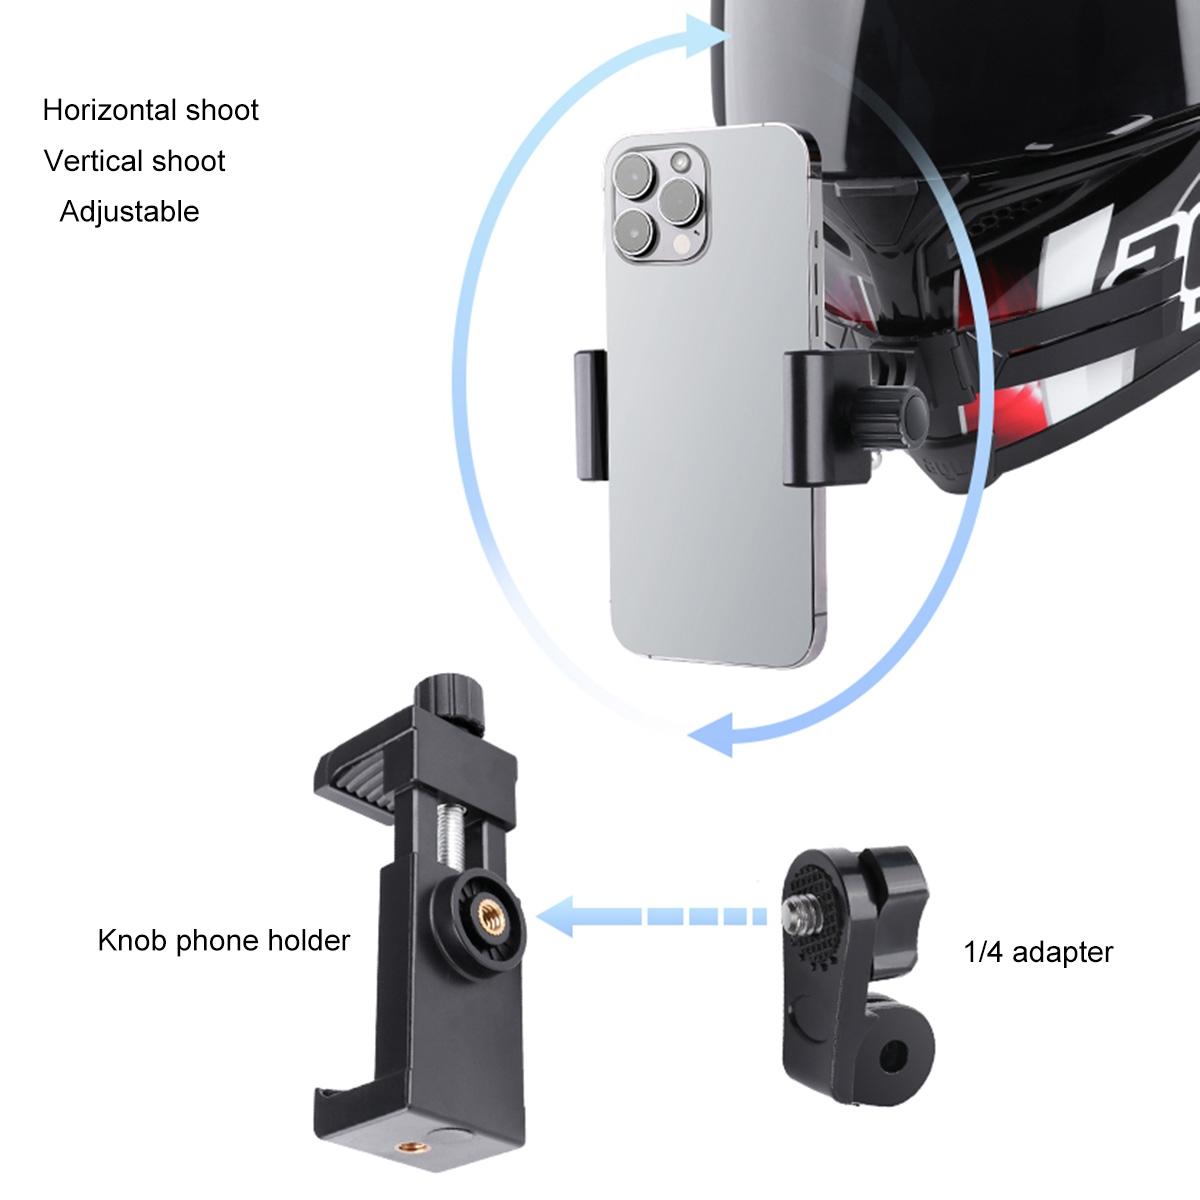 Foldable Bending Action Camera Phone Helmet Mount Kit with J-Hook Buckle & Rotation Phone Clamp & Adapter (Black)